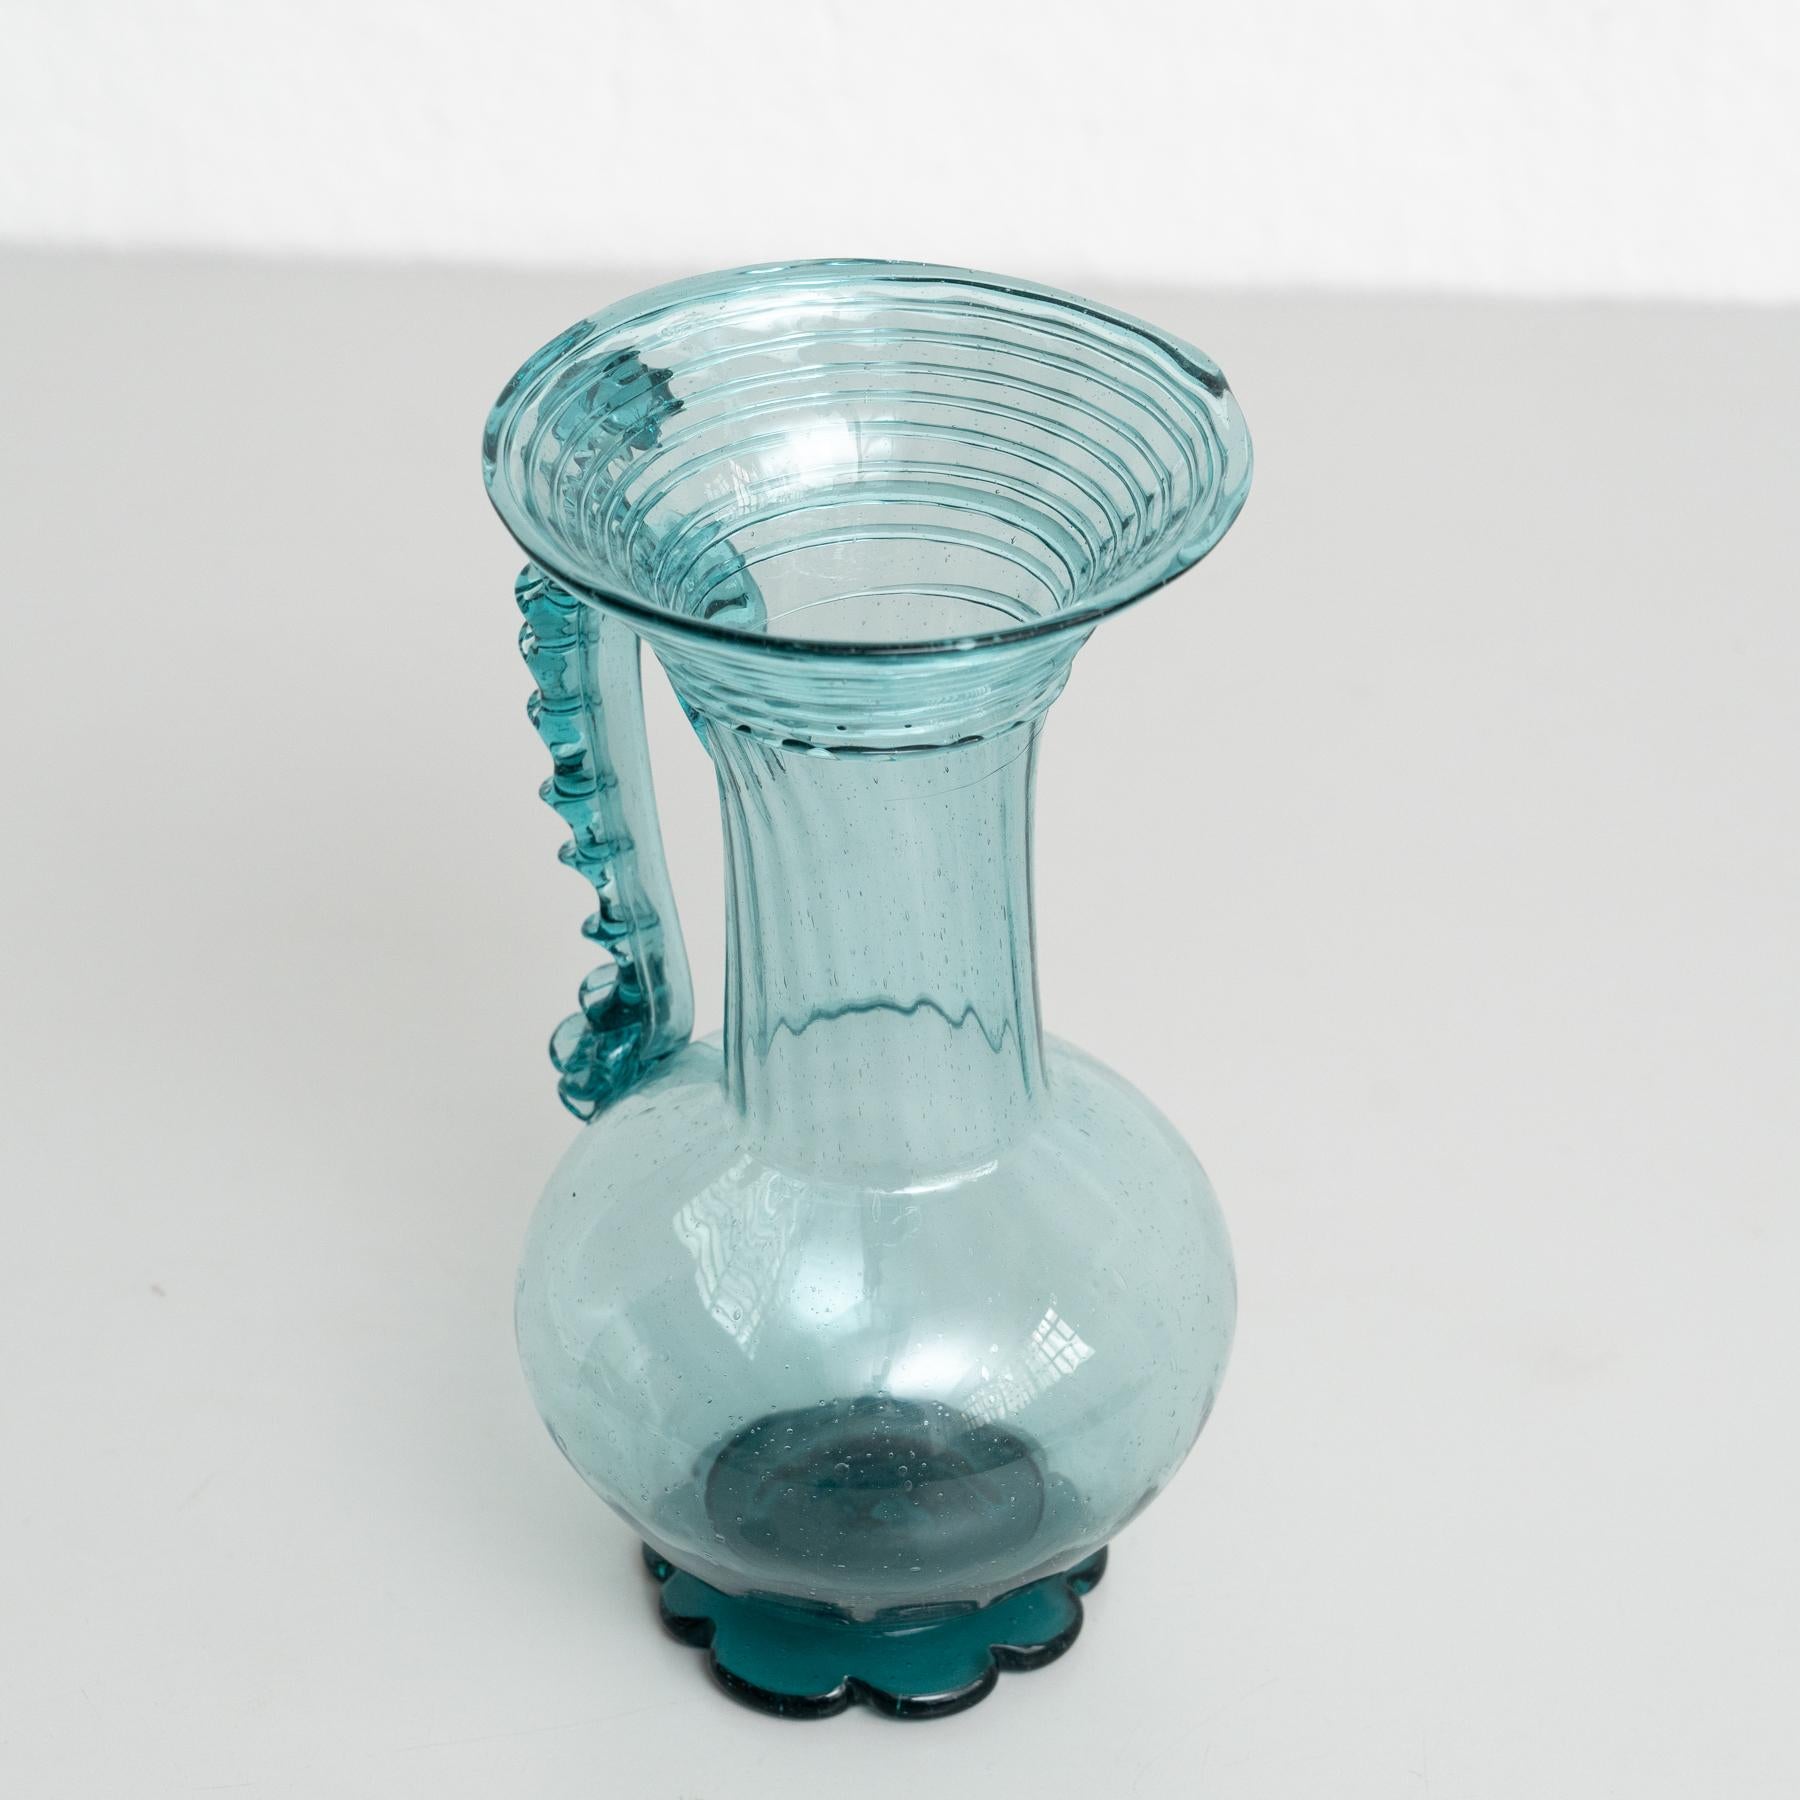 Exceptional Blown Glass Vase - Early XXth Century - Spanish Craftsmanship For Sale 5